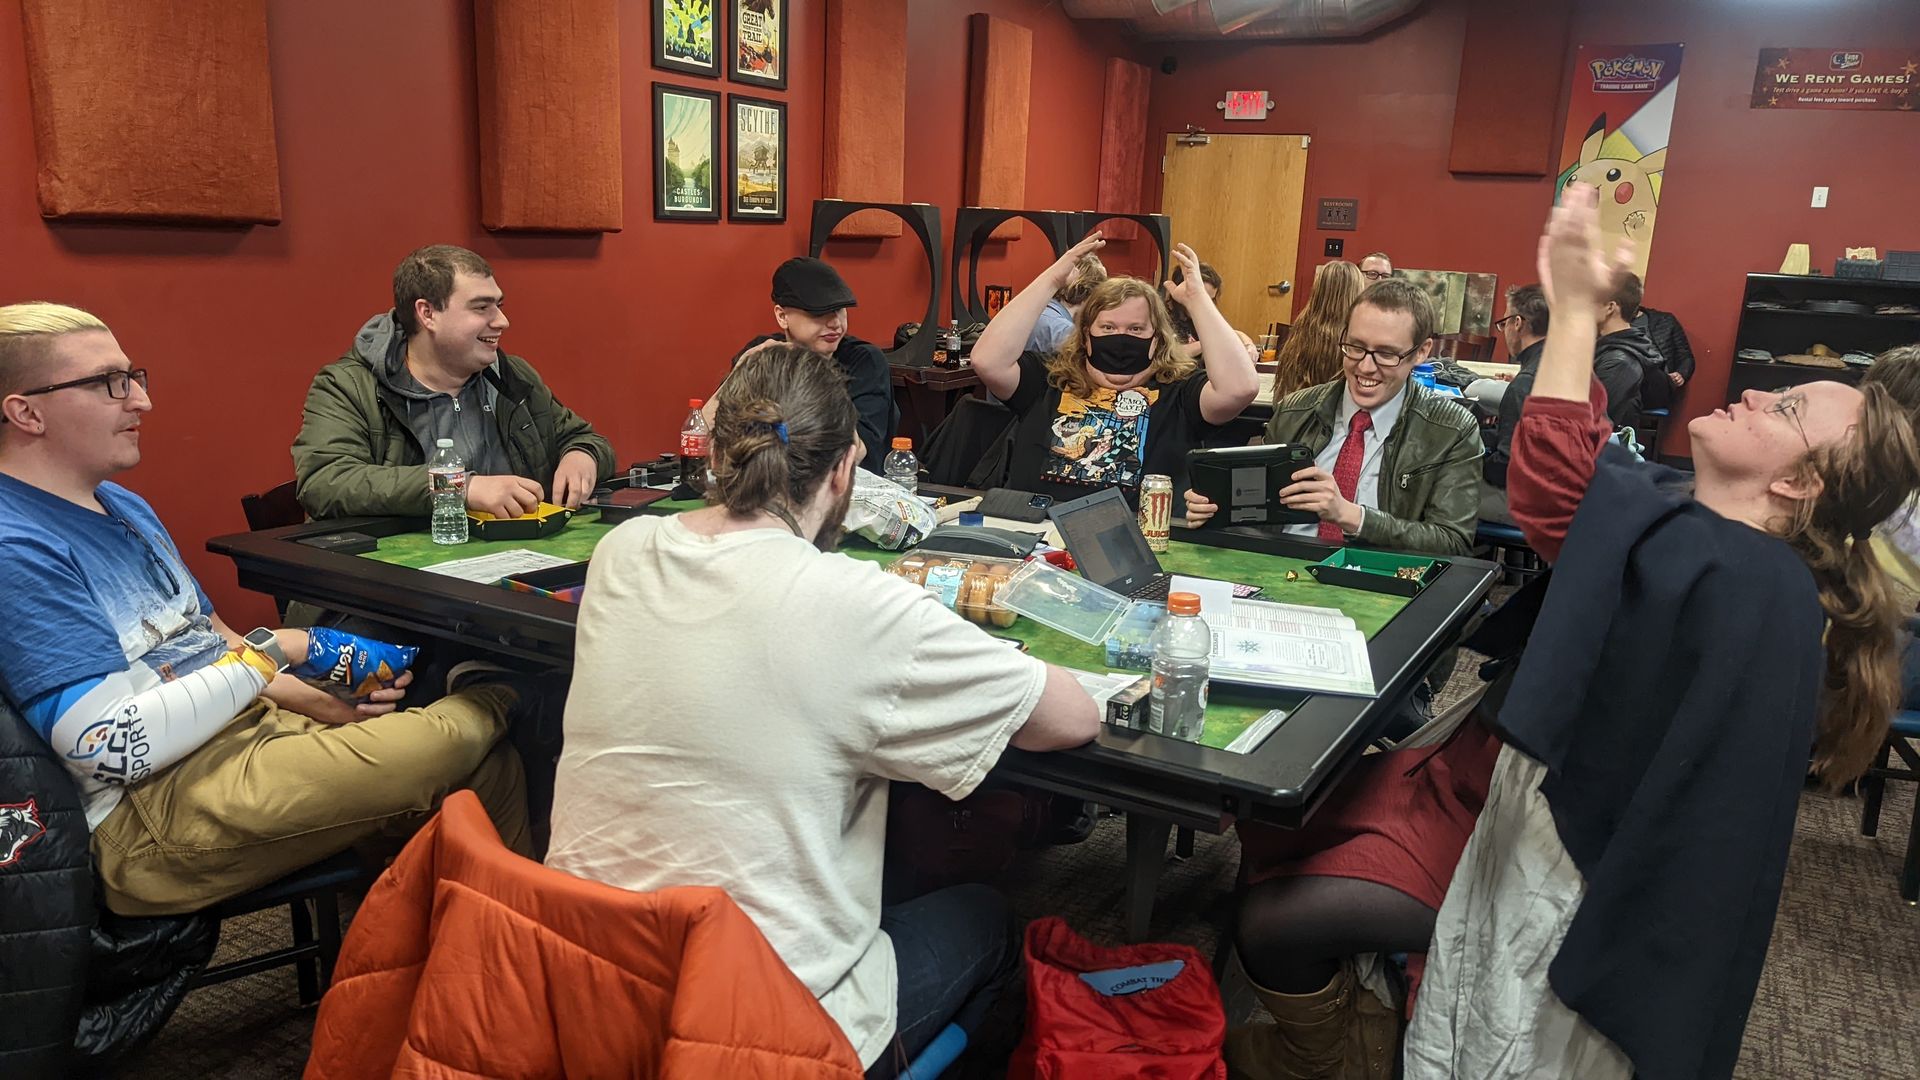 A group of people play Dungeons & Dragons around a table in a game store.